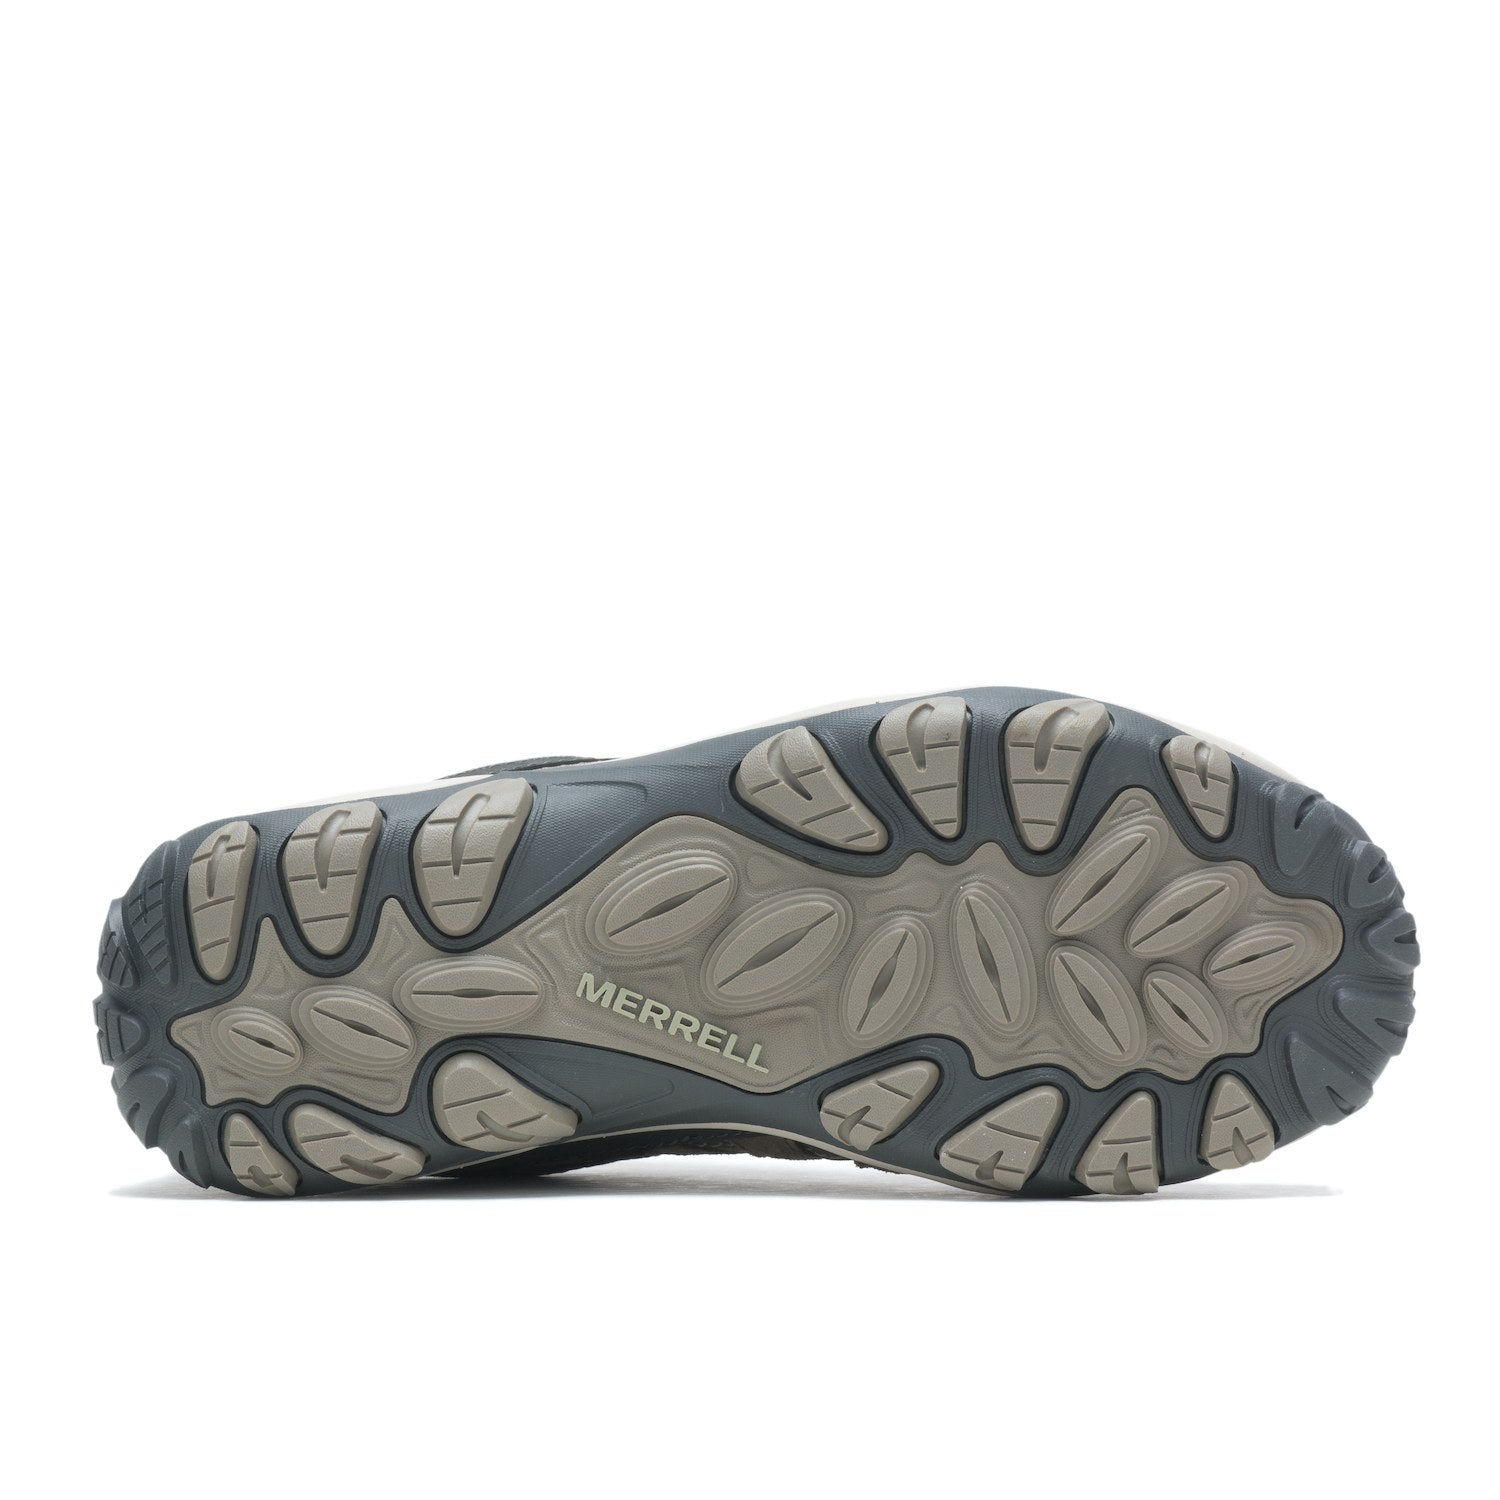 Women's Accentor 3 WP - Brindle